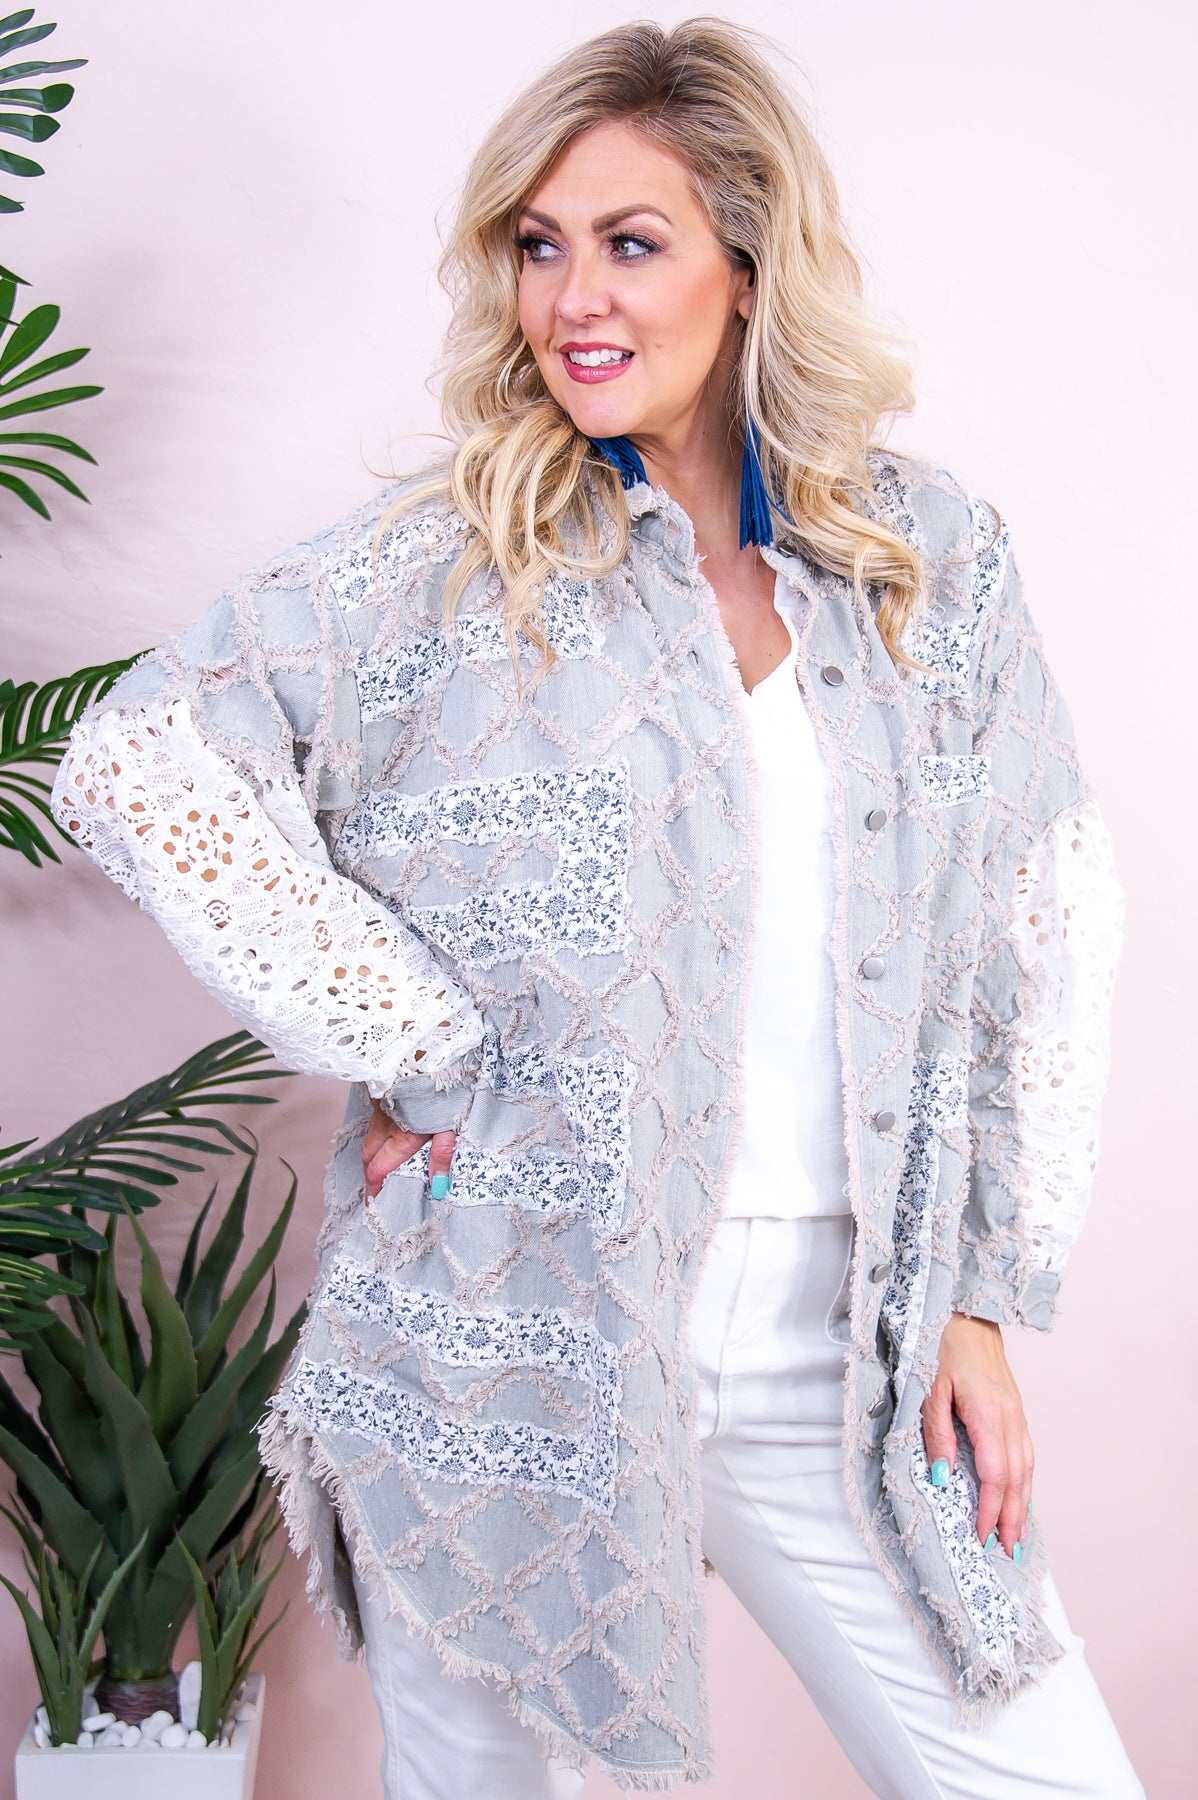 Essential Chicness White/Light Denim Distressed/Frayed Floral Jacket - O5434WH